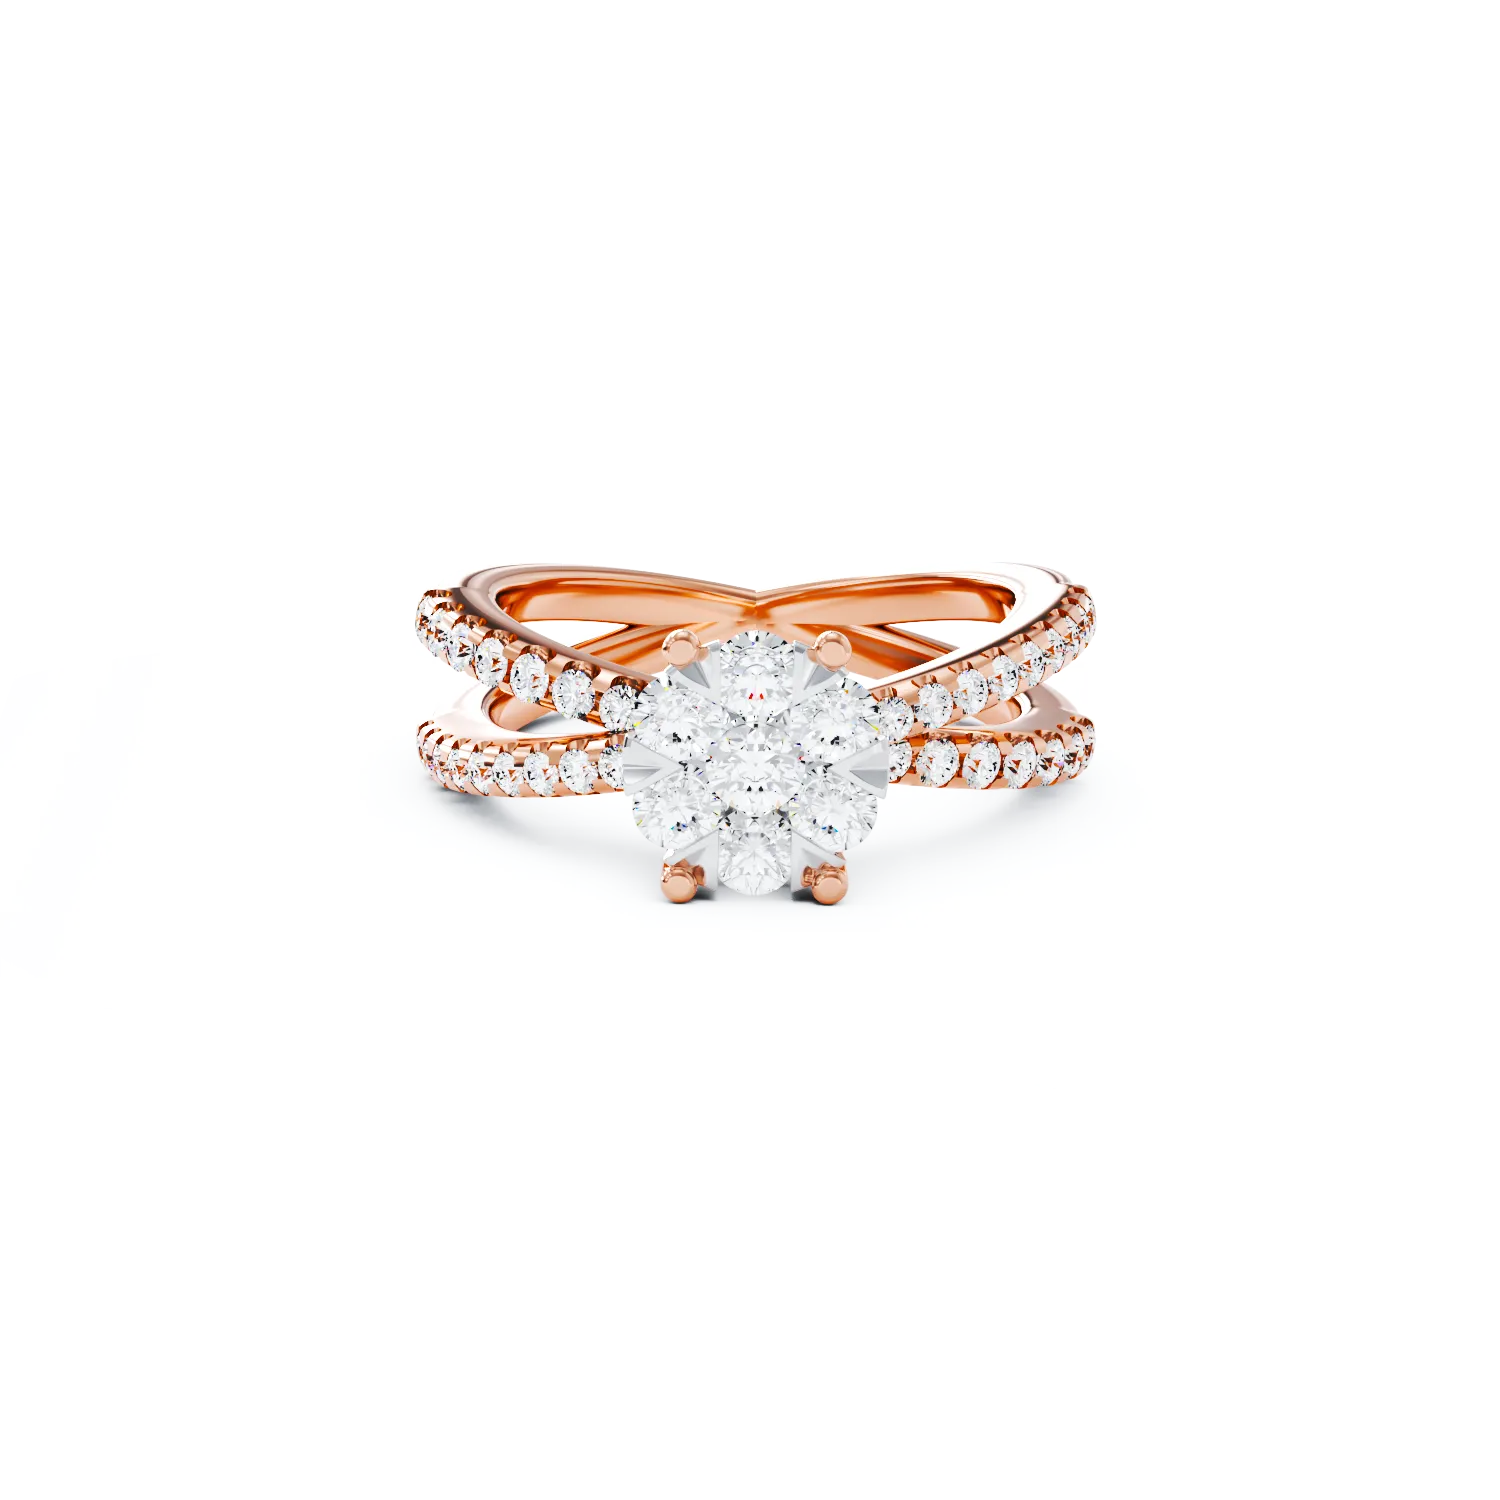 18K rose gold engagement ring with 0.6ct diamonds